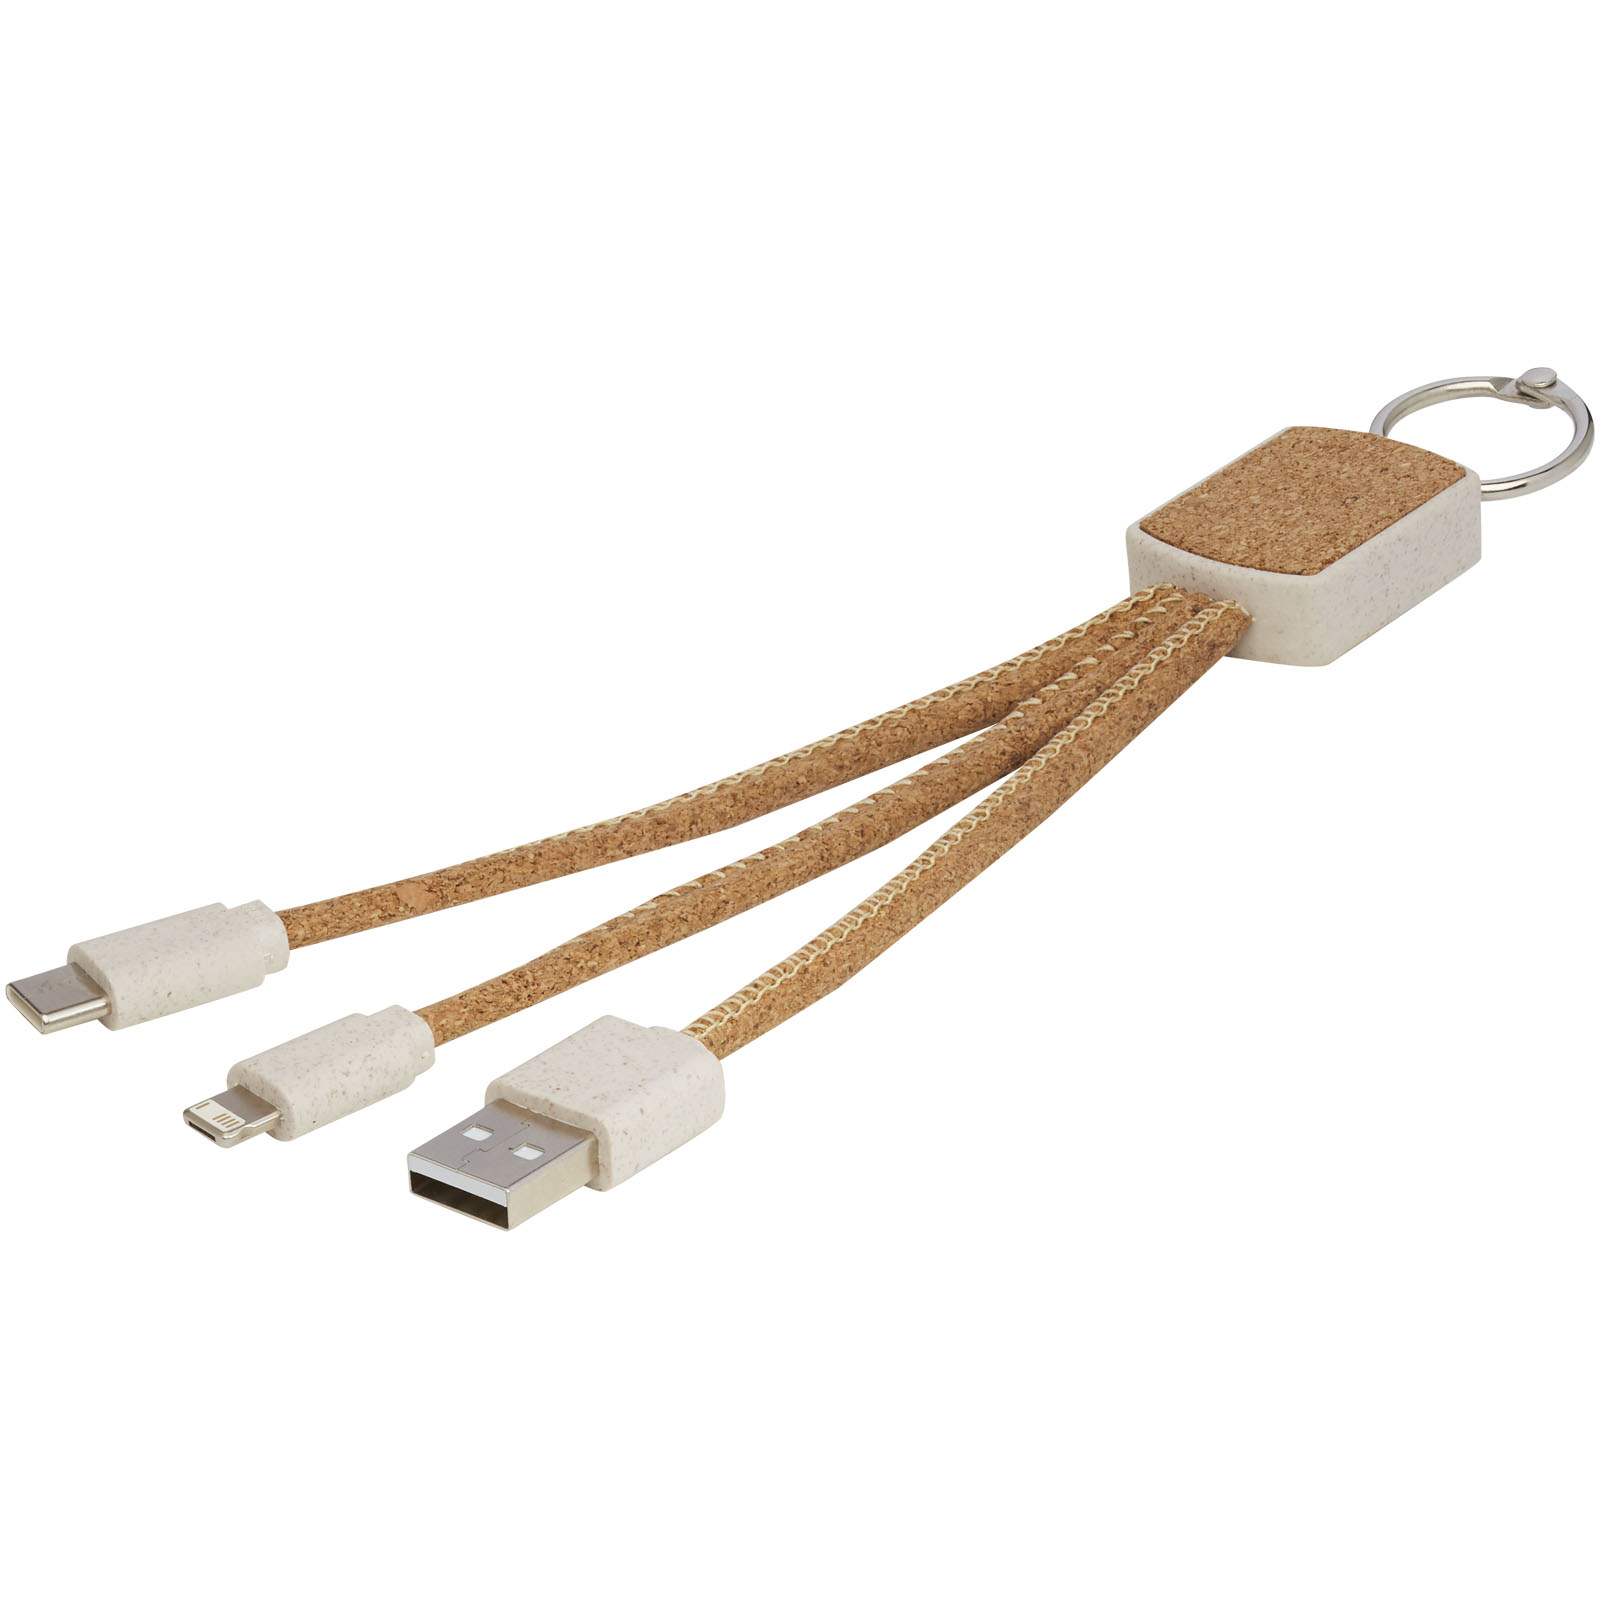 Technology - Bates wheat straw and cork 3-in-1 charging cable